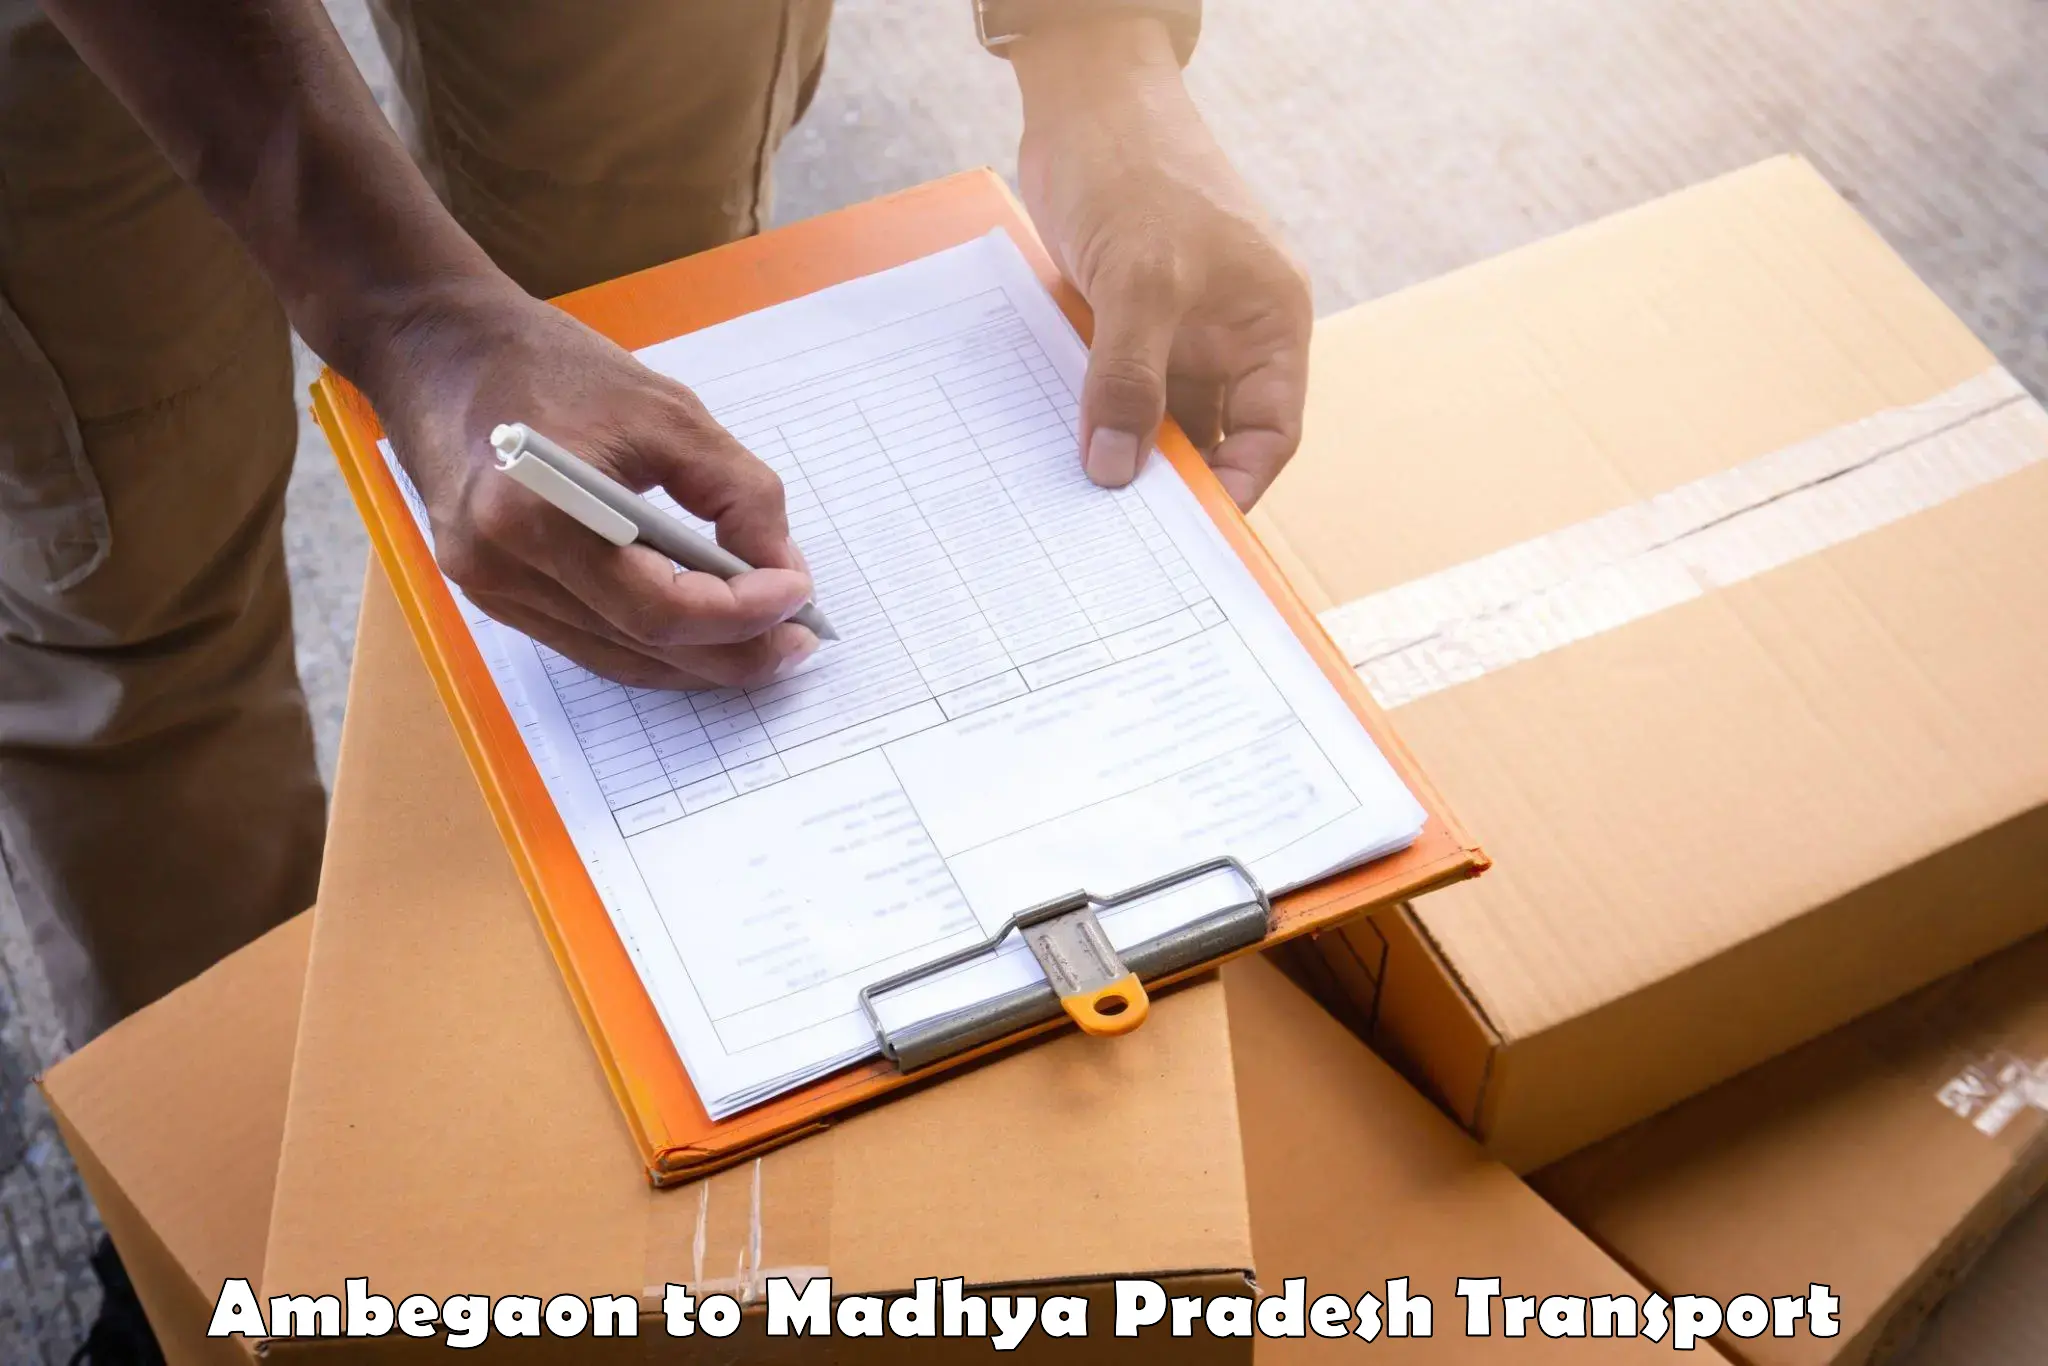 Online transport service Ambegaon to Ghugri